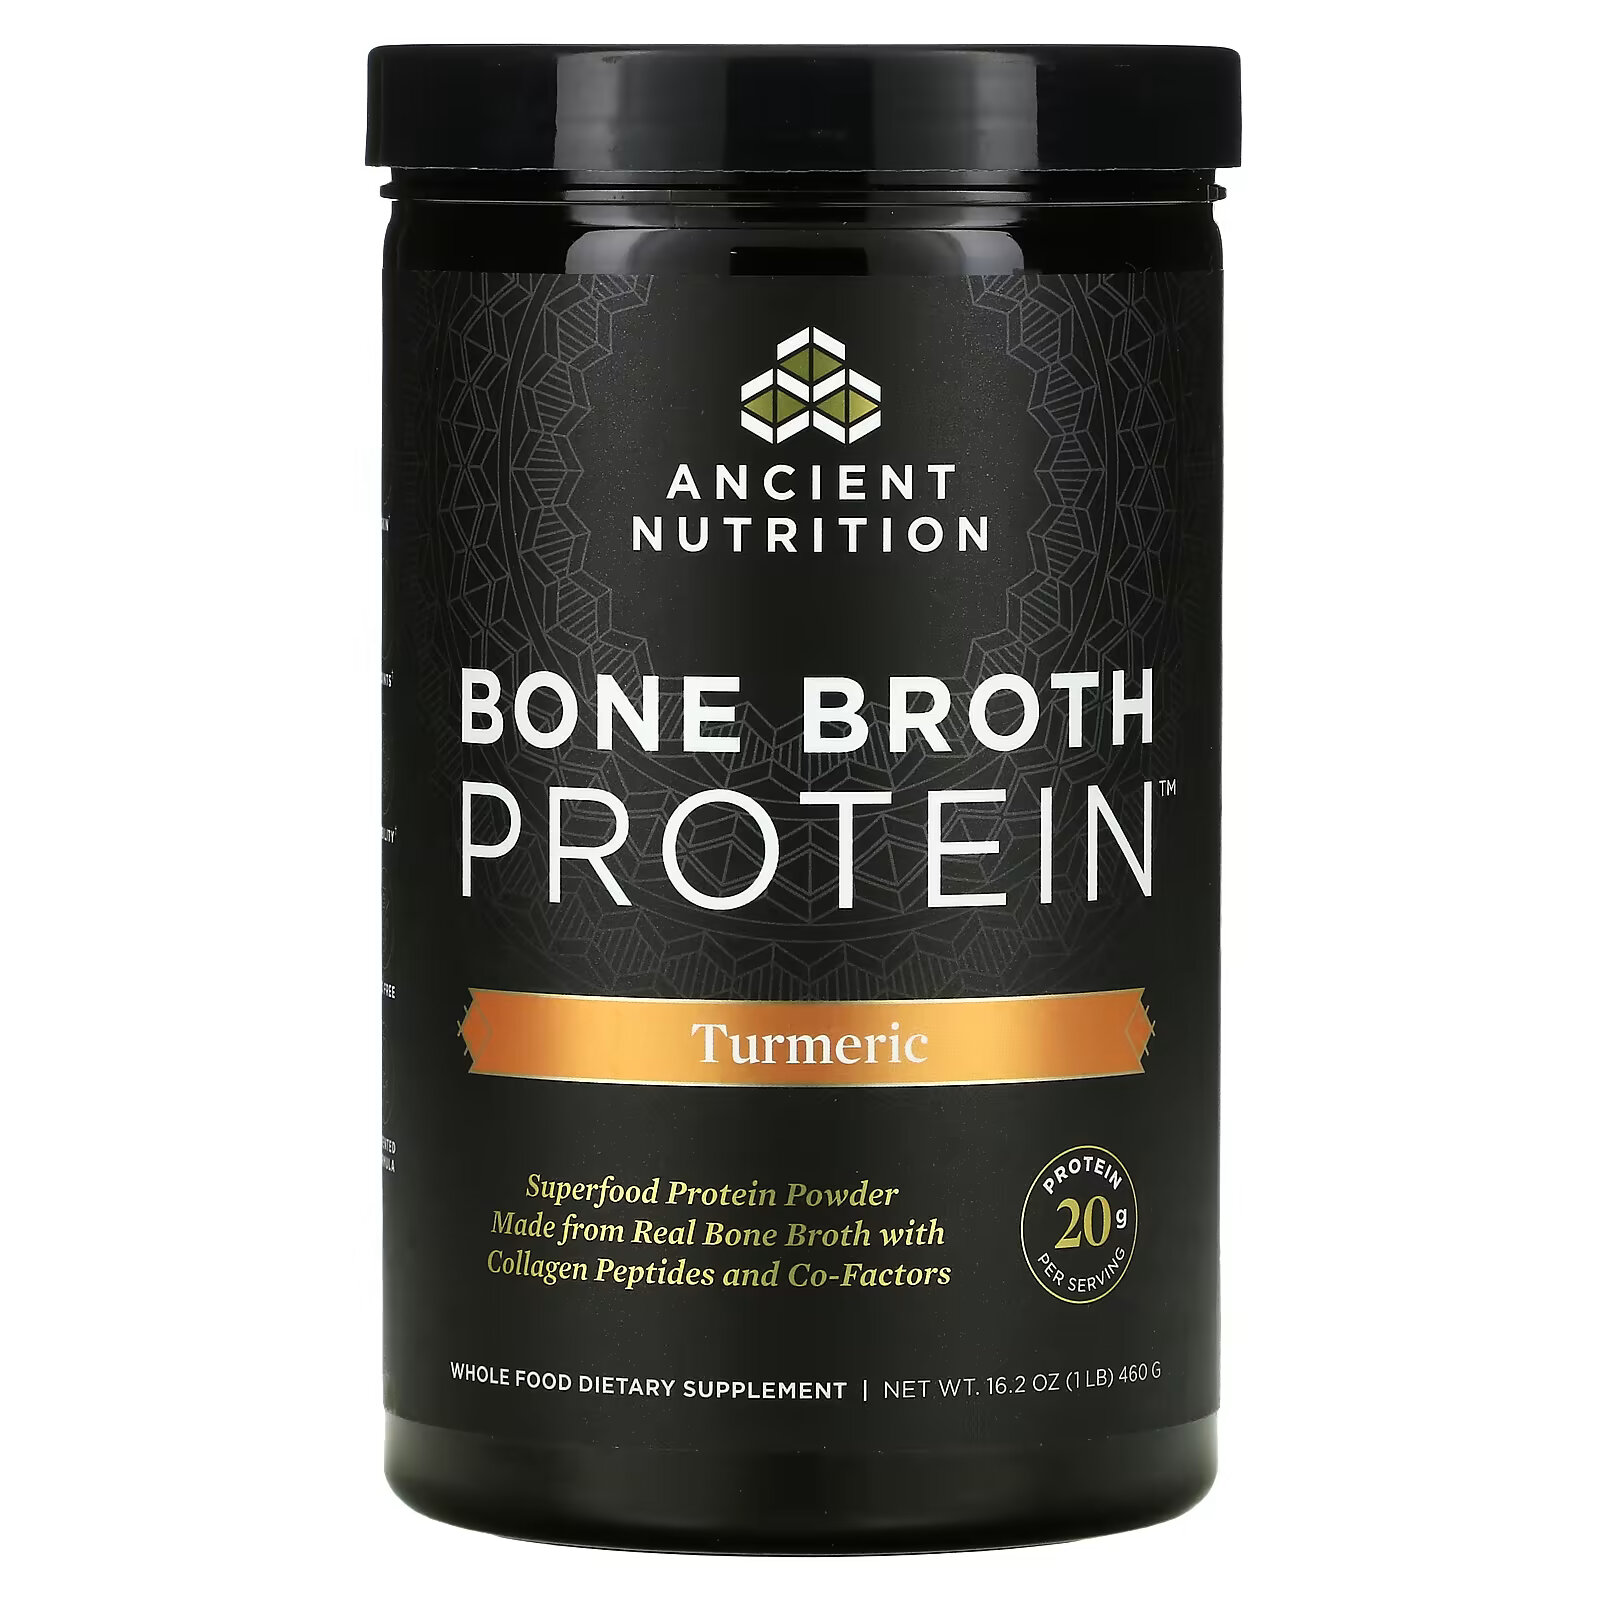 Dr. Axe / Ancient Nutrition, Bone Broth Protein, куркума, 460 г (1 фунт) dr axe ancient nutrition bone broth protein куриный суп 323 г 11 4 унции